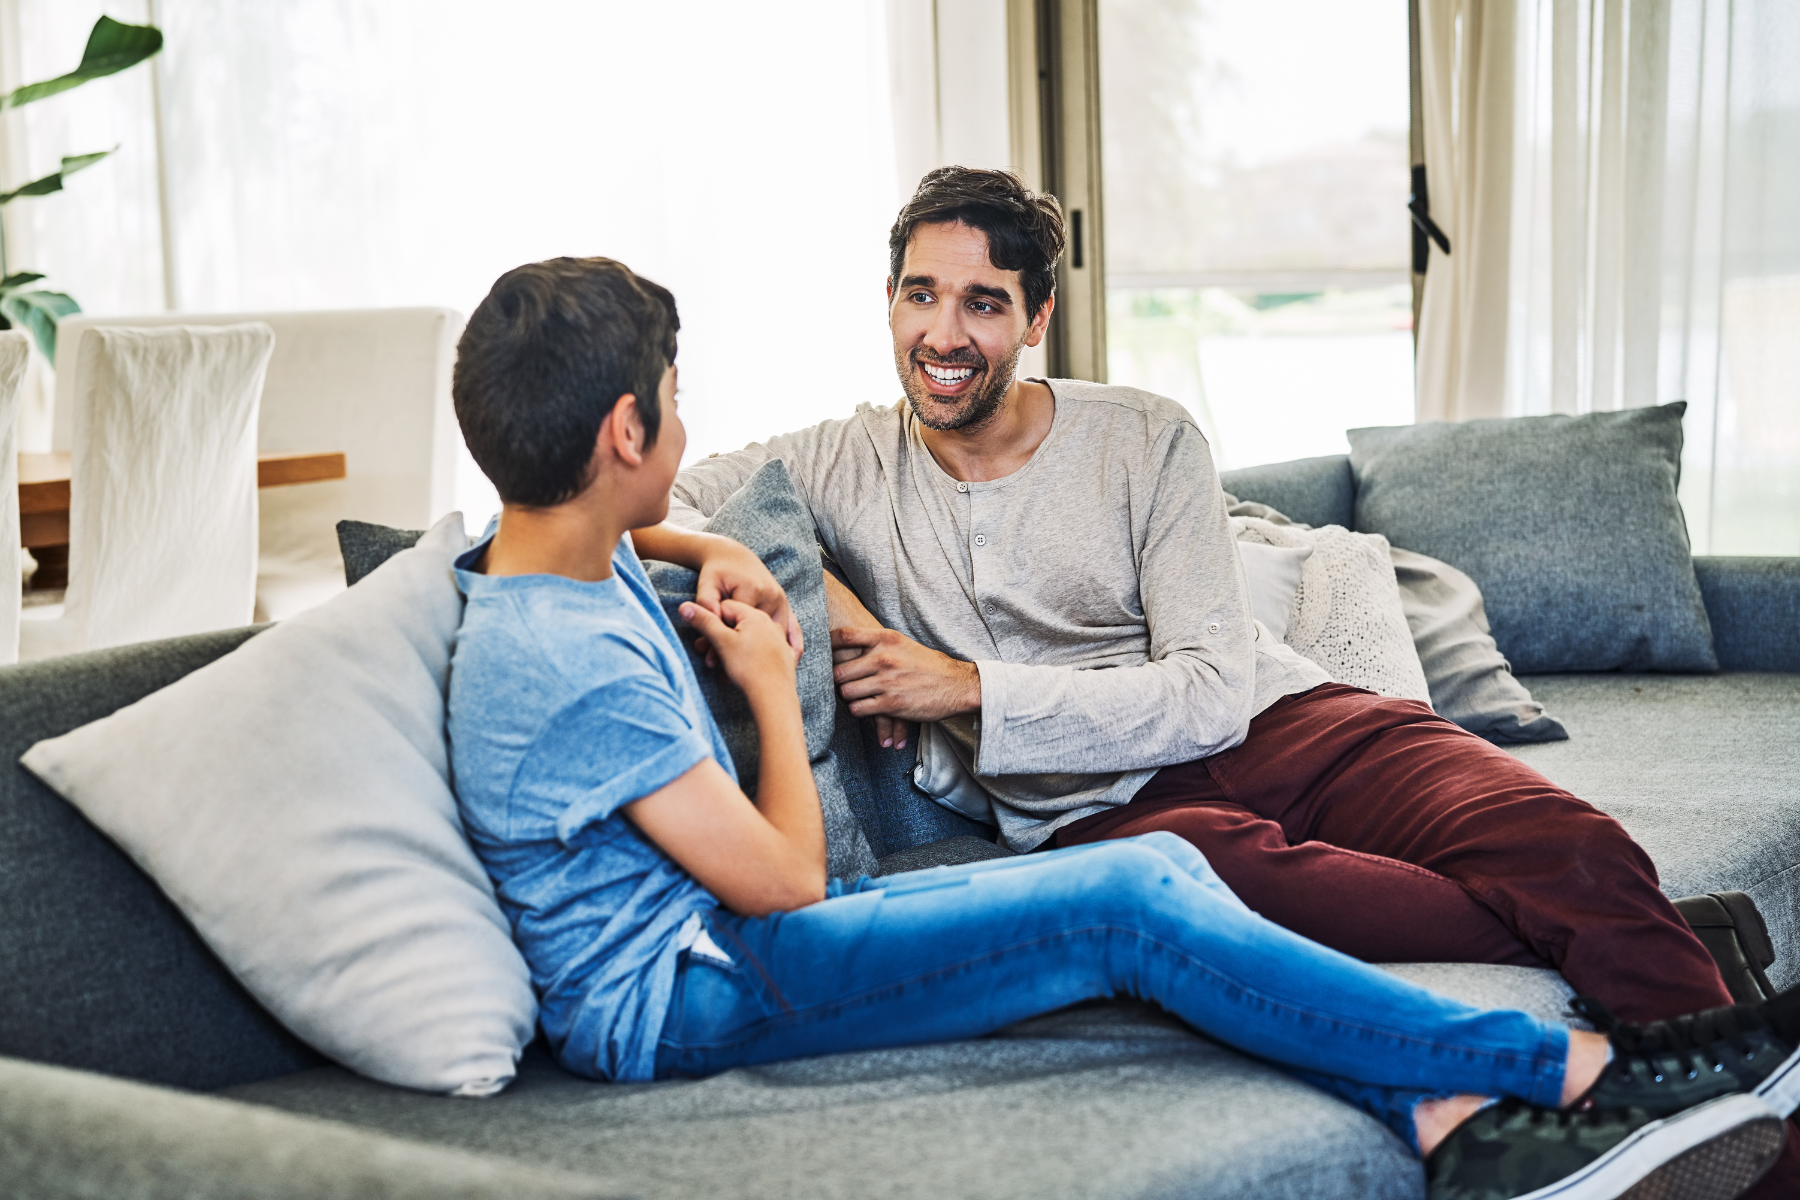 man and young teen sit together in conversation on a living room couch